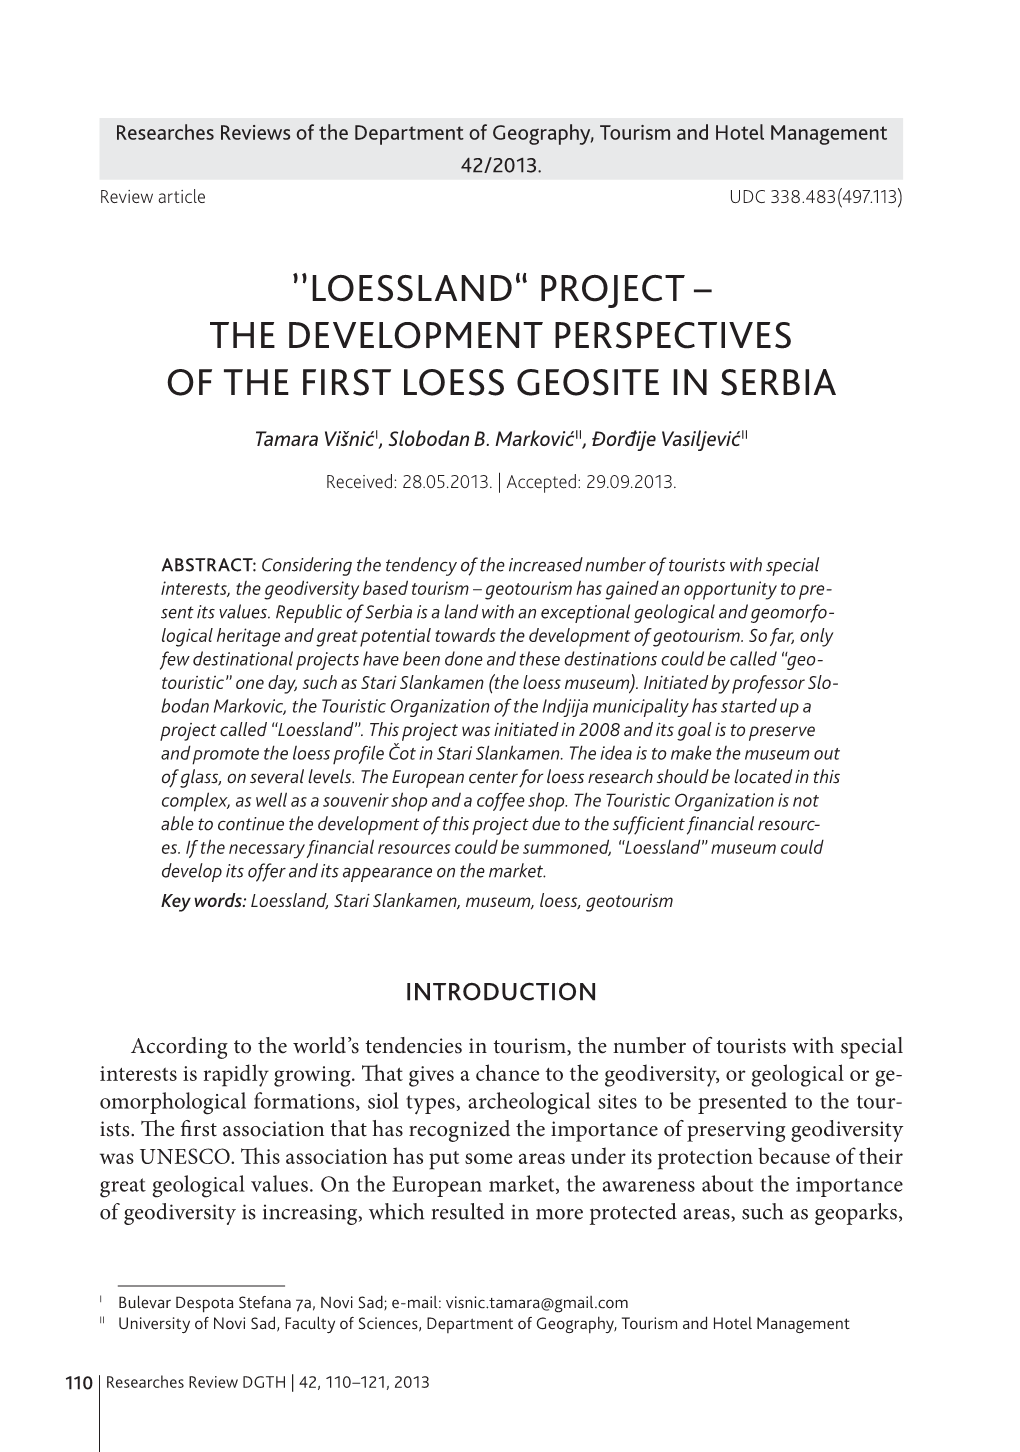 ''Loessland“ Project – the Development Perspectives